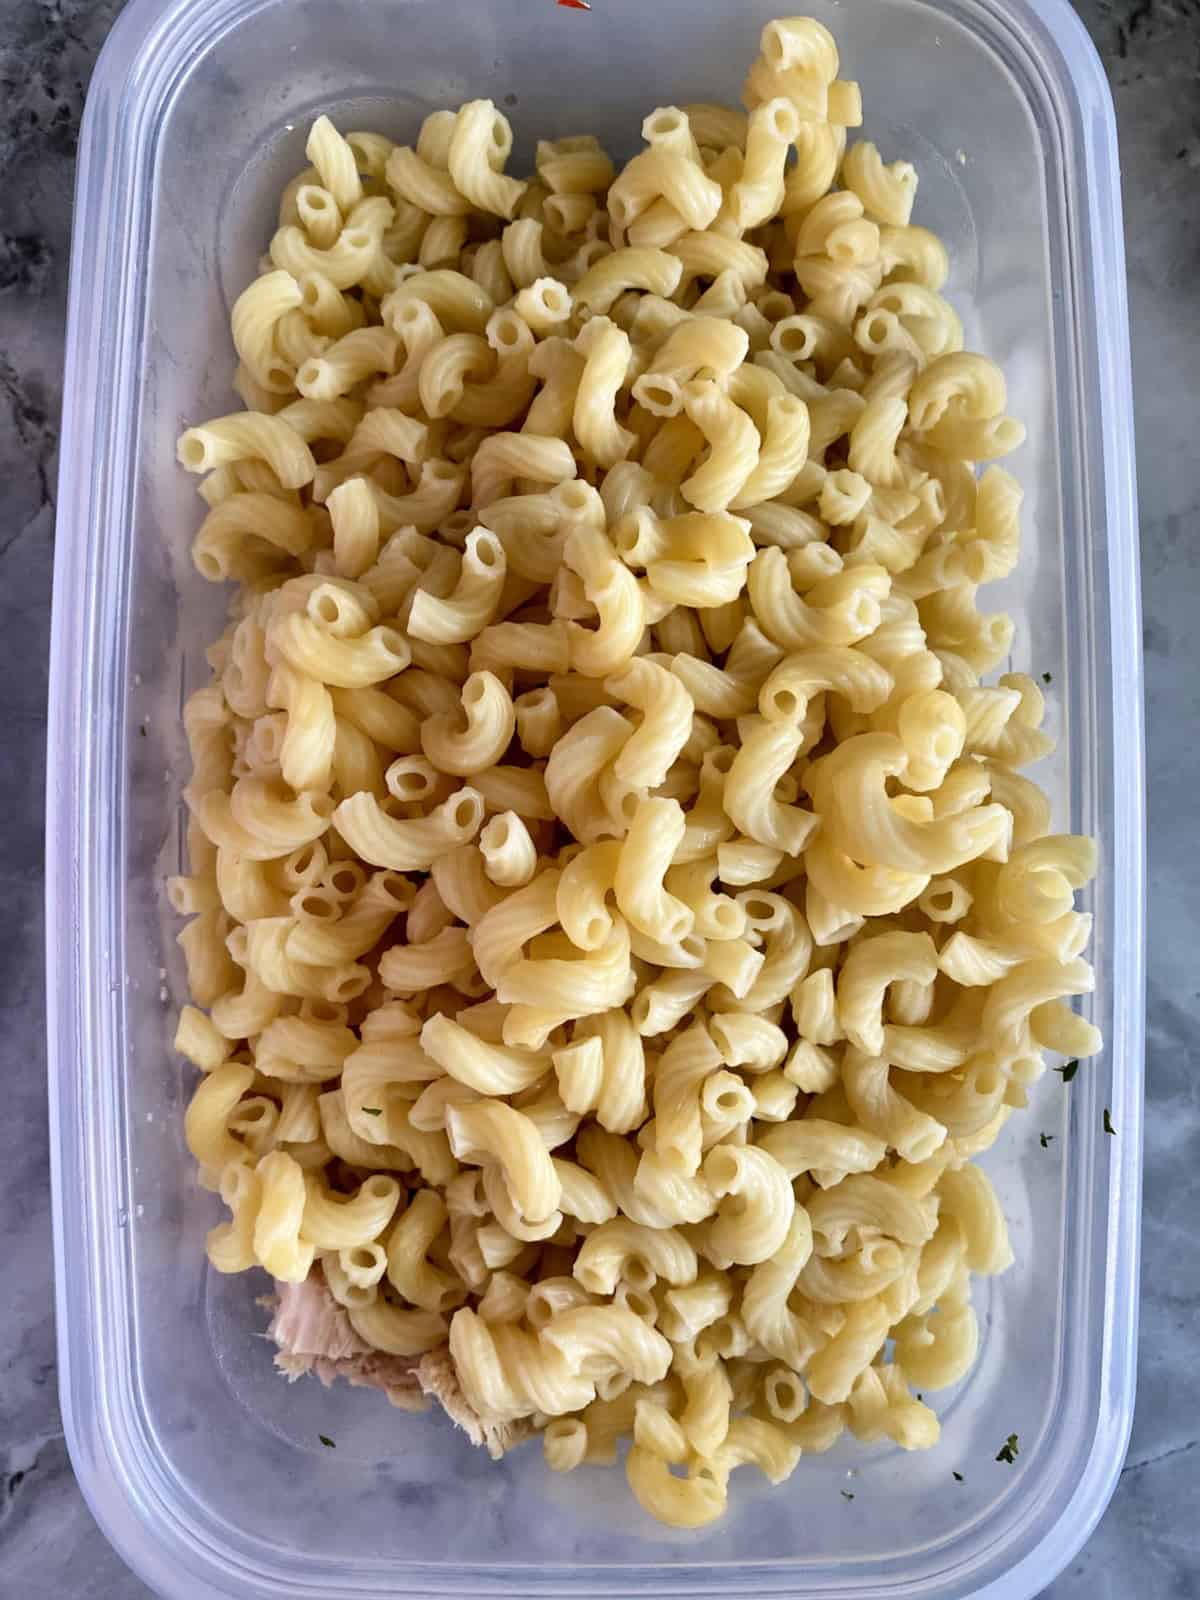 top view of tupperware filled with cooked macaroni noodles.